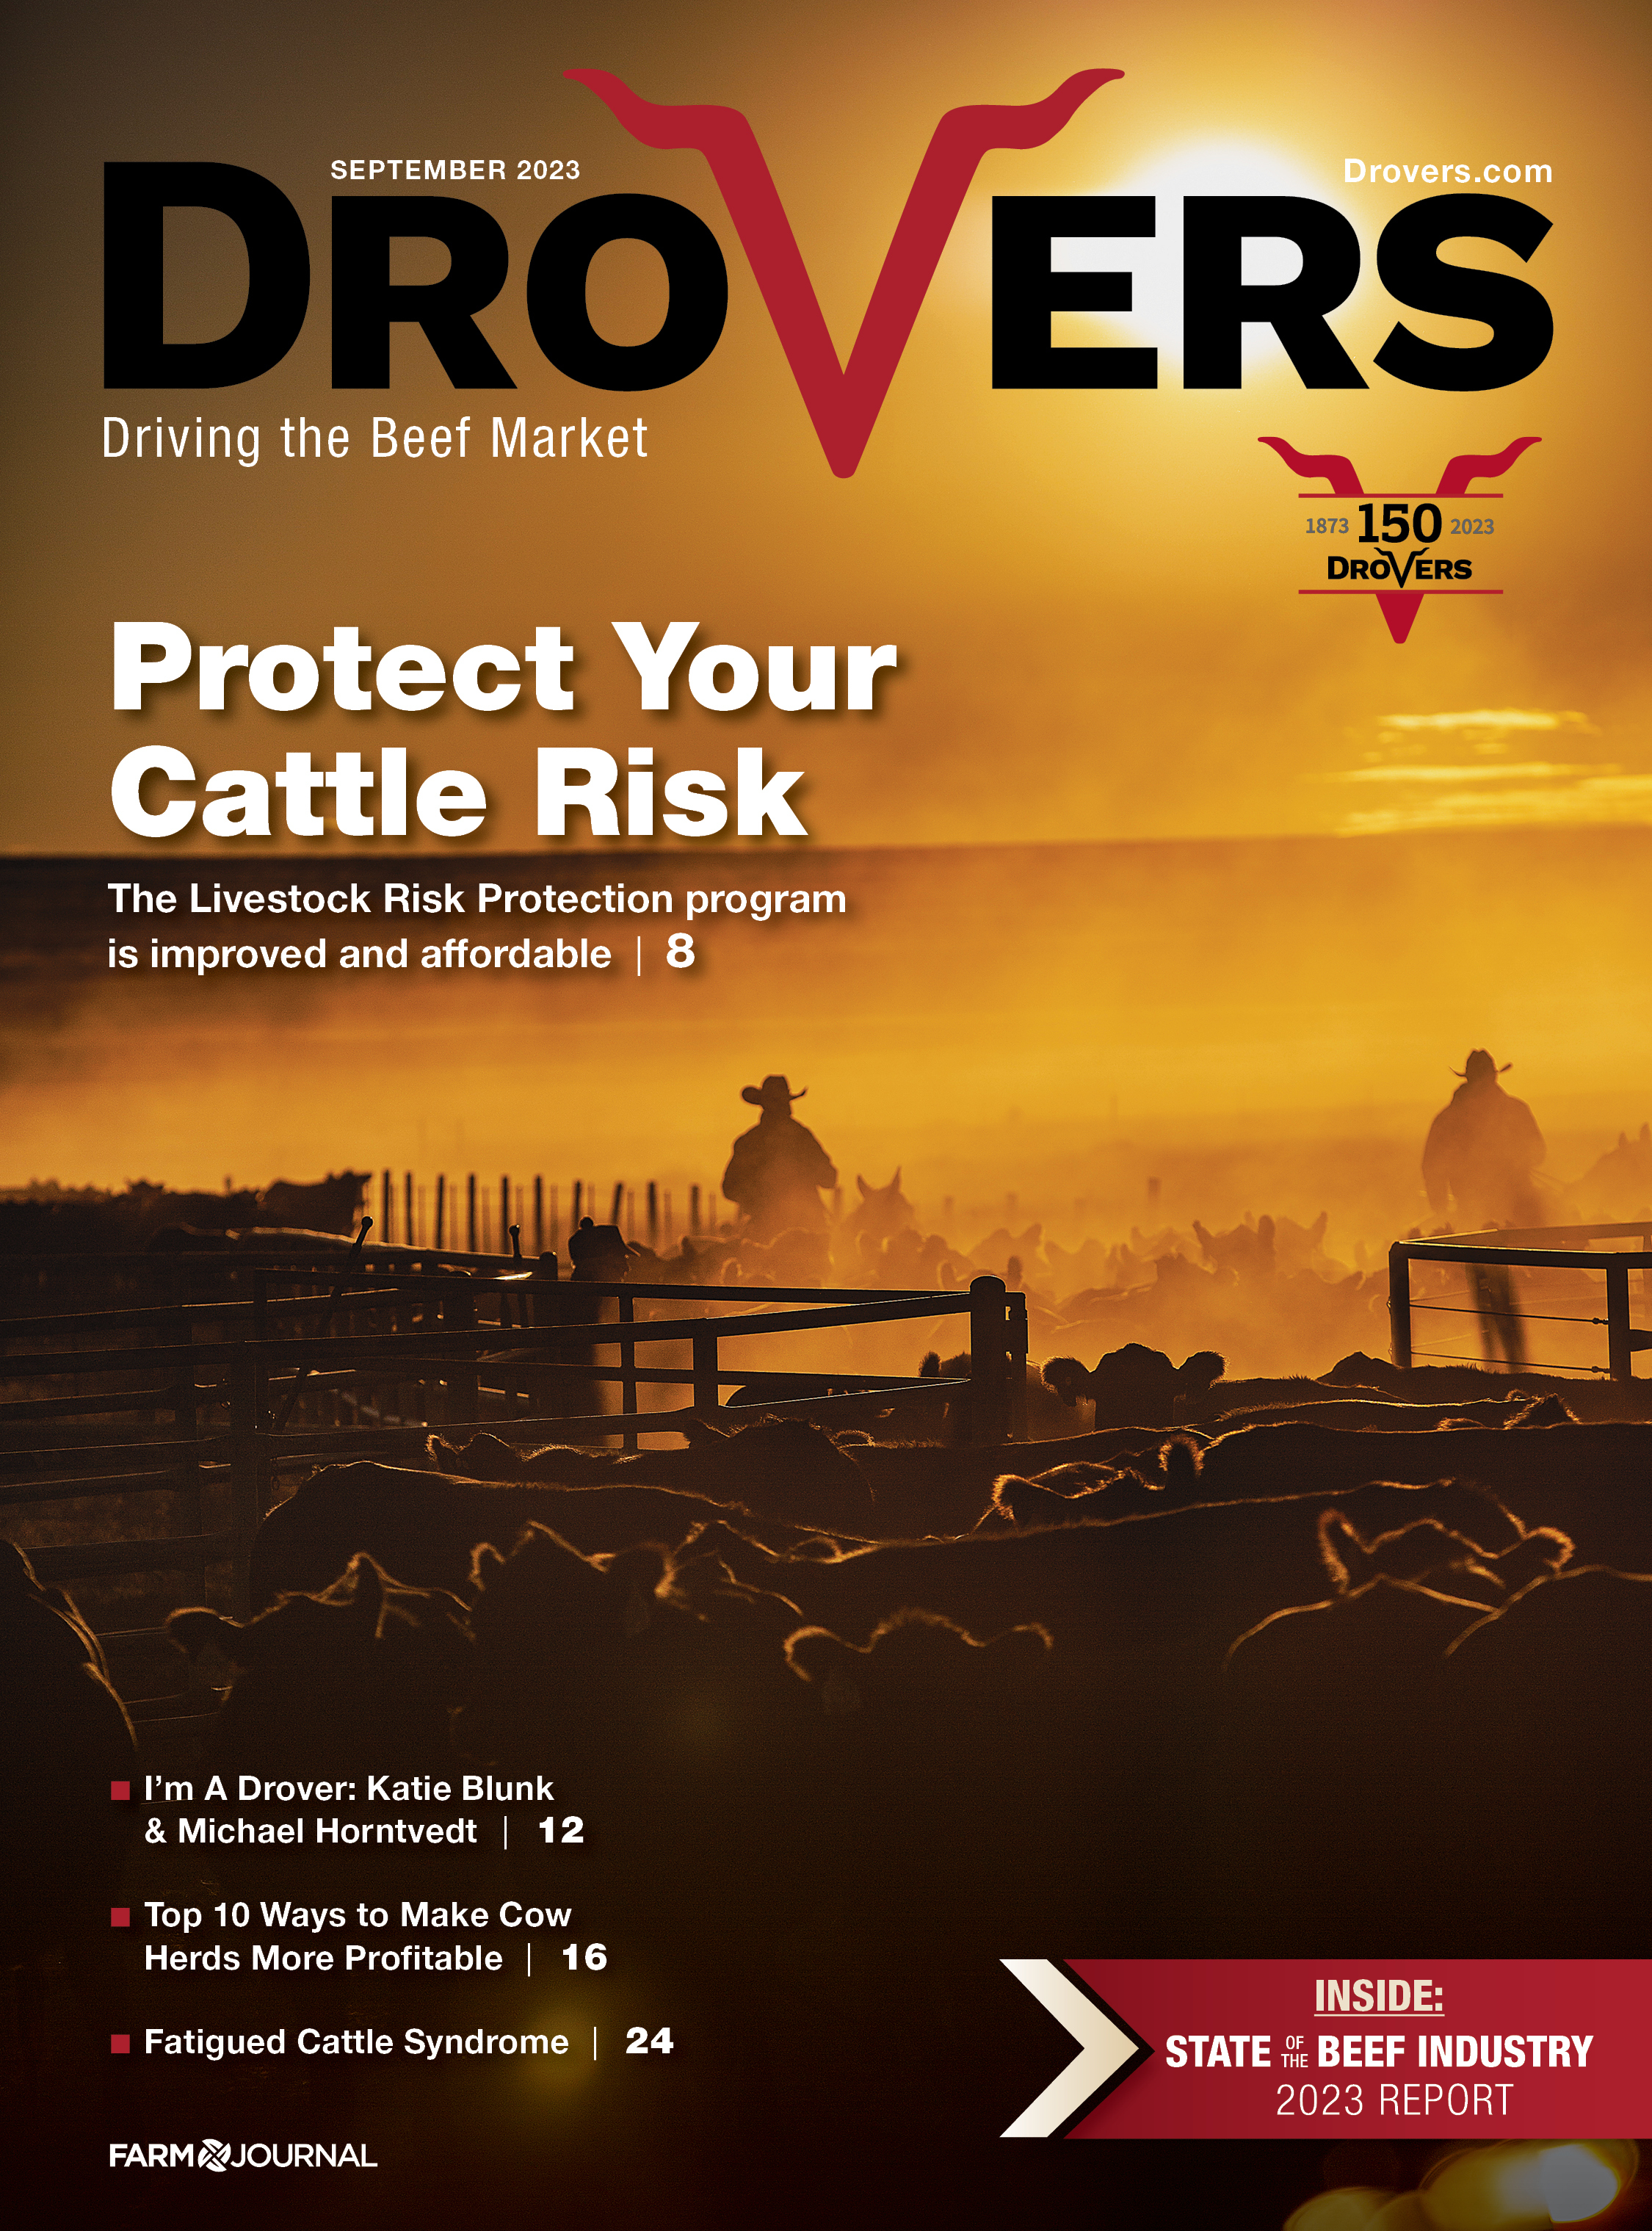  Drovers - September 2023 Cover Final 